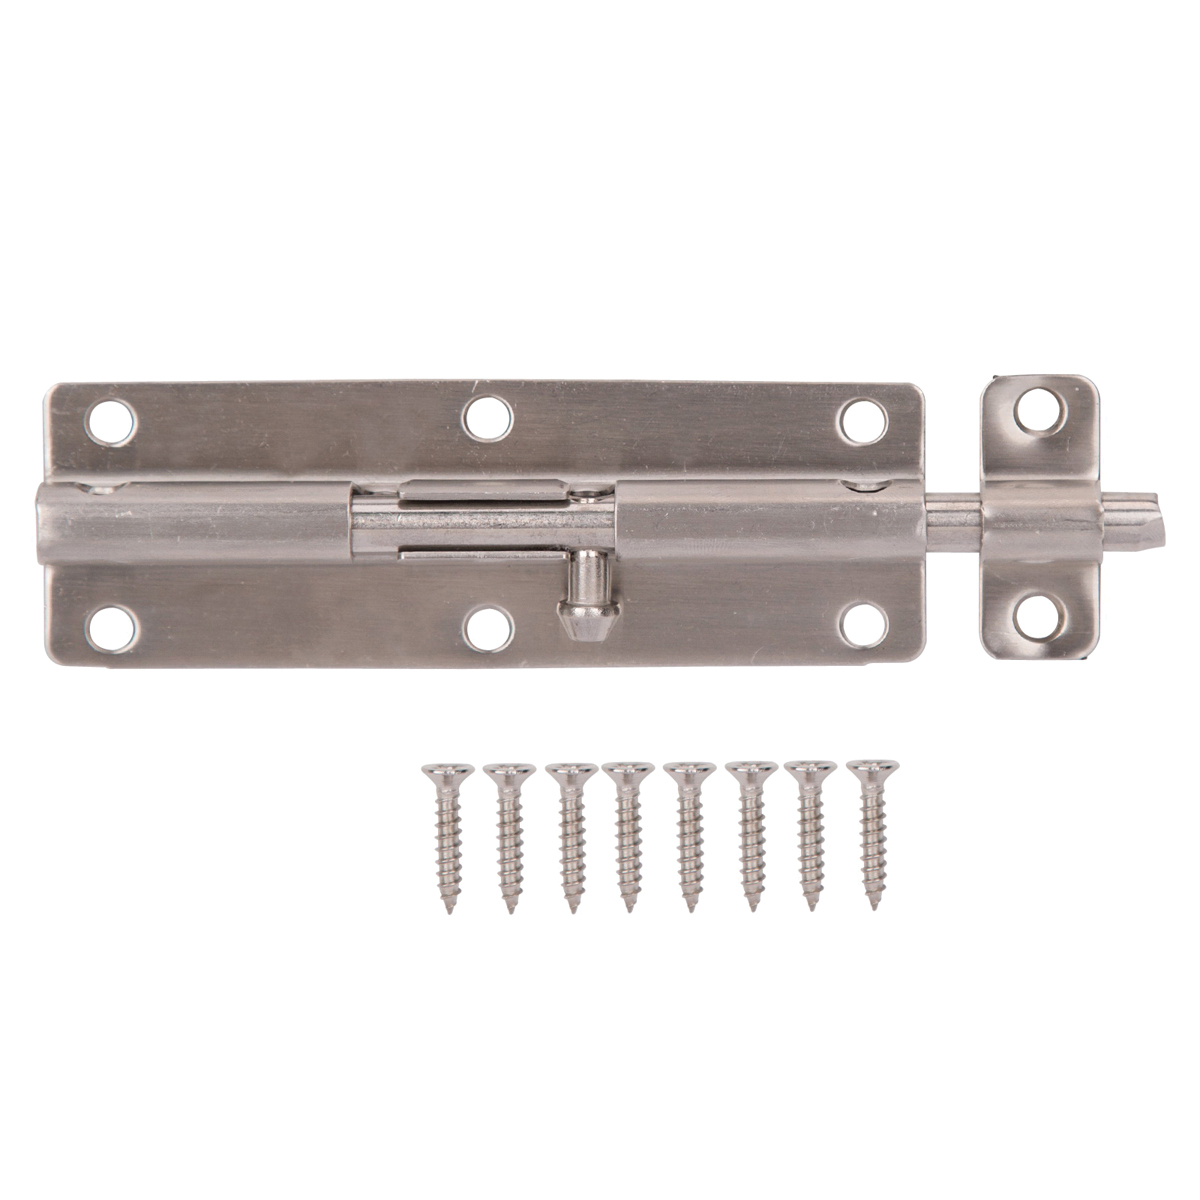 SS-B06-PS Barrel Bolt, 0.31 Dia in Bolt Head, 6 in L Bolt, Stainless Steel, Stainless Steel